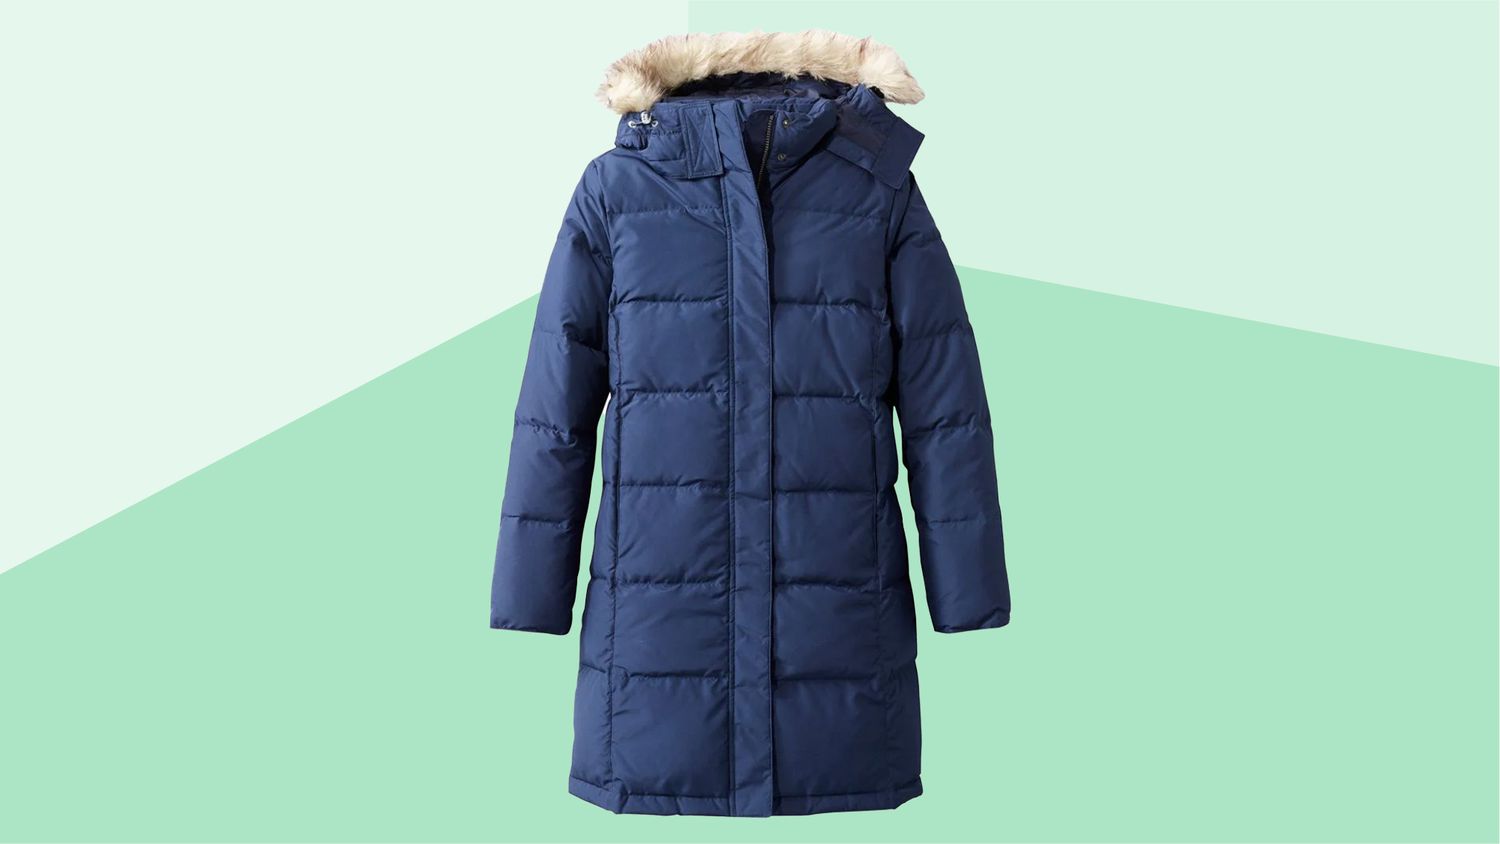 Girls Padded School Quilted Winter Kids Coat Jacket Puffer Fur Hooded Long Parka 